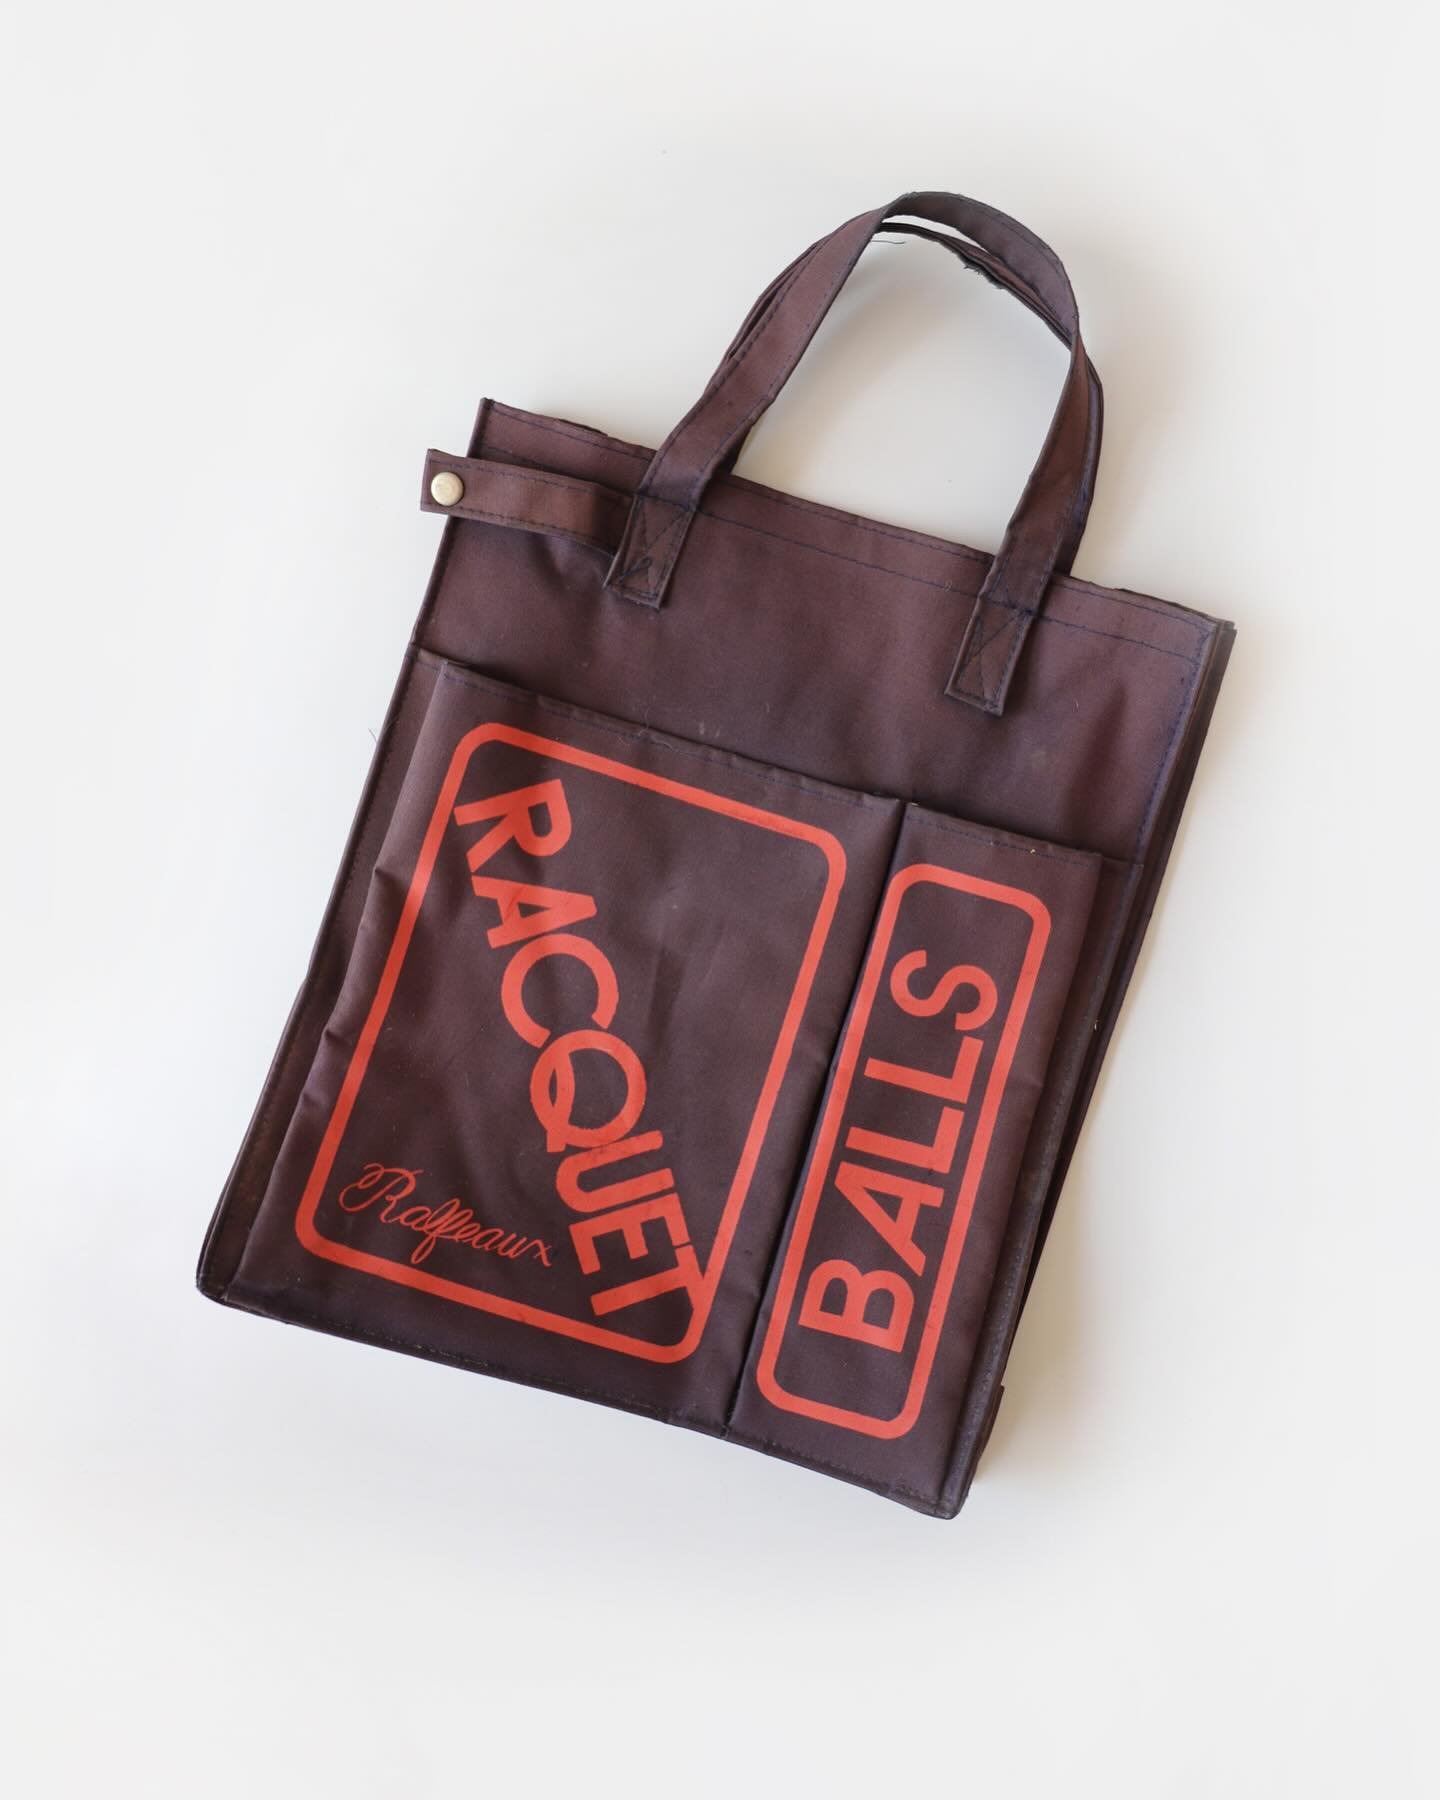 Vintage racquet ball bag new online and more coming this week.